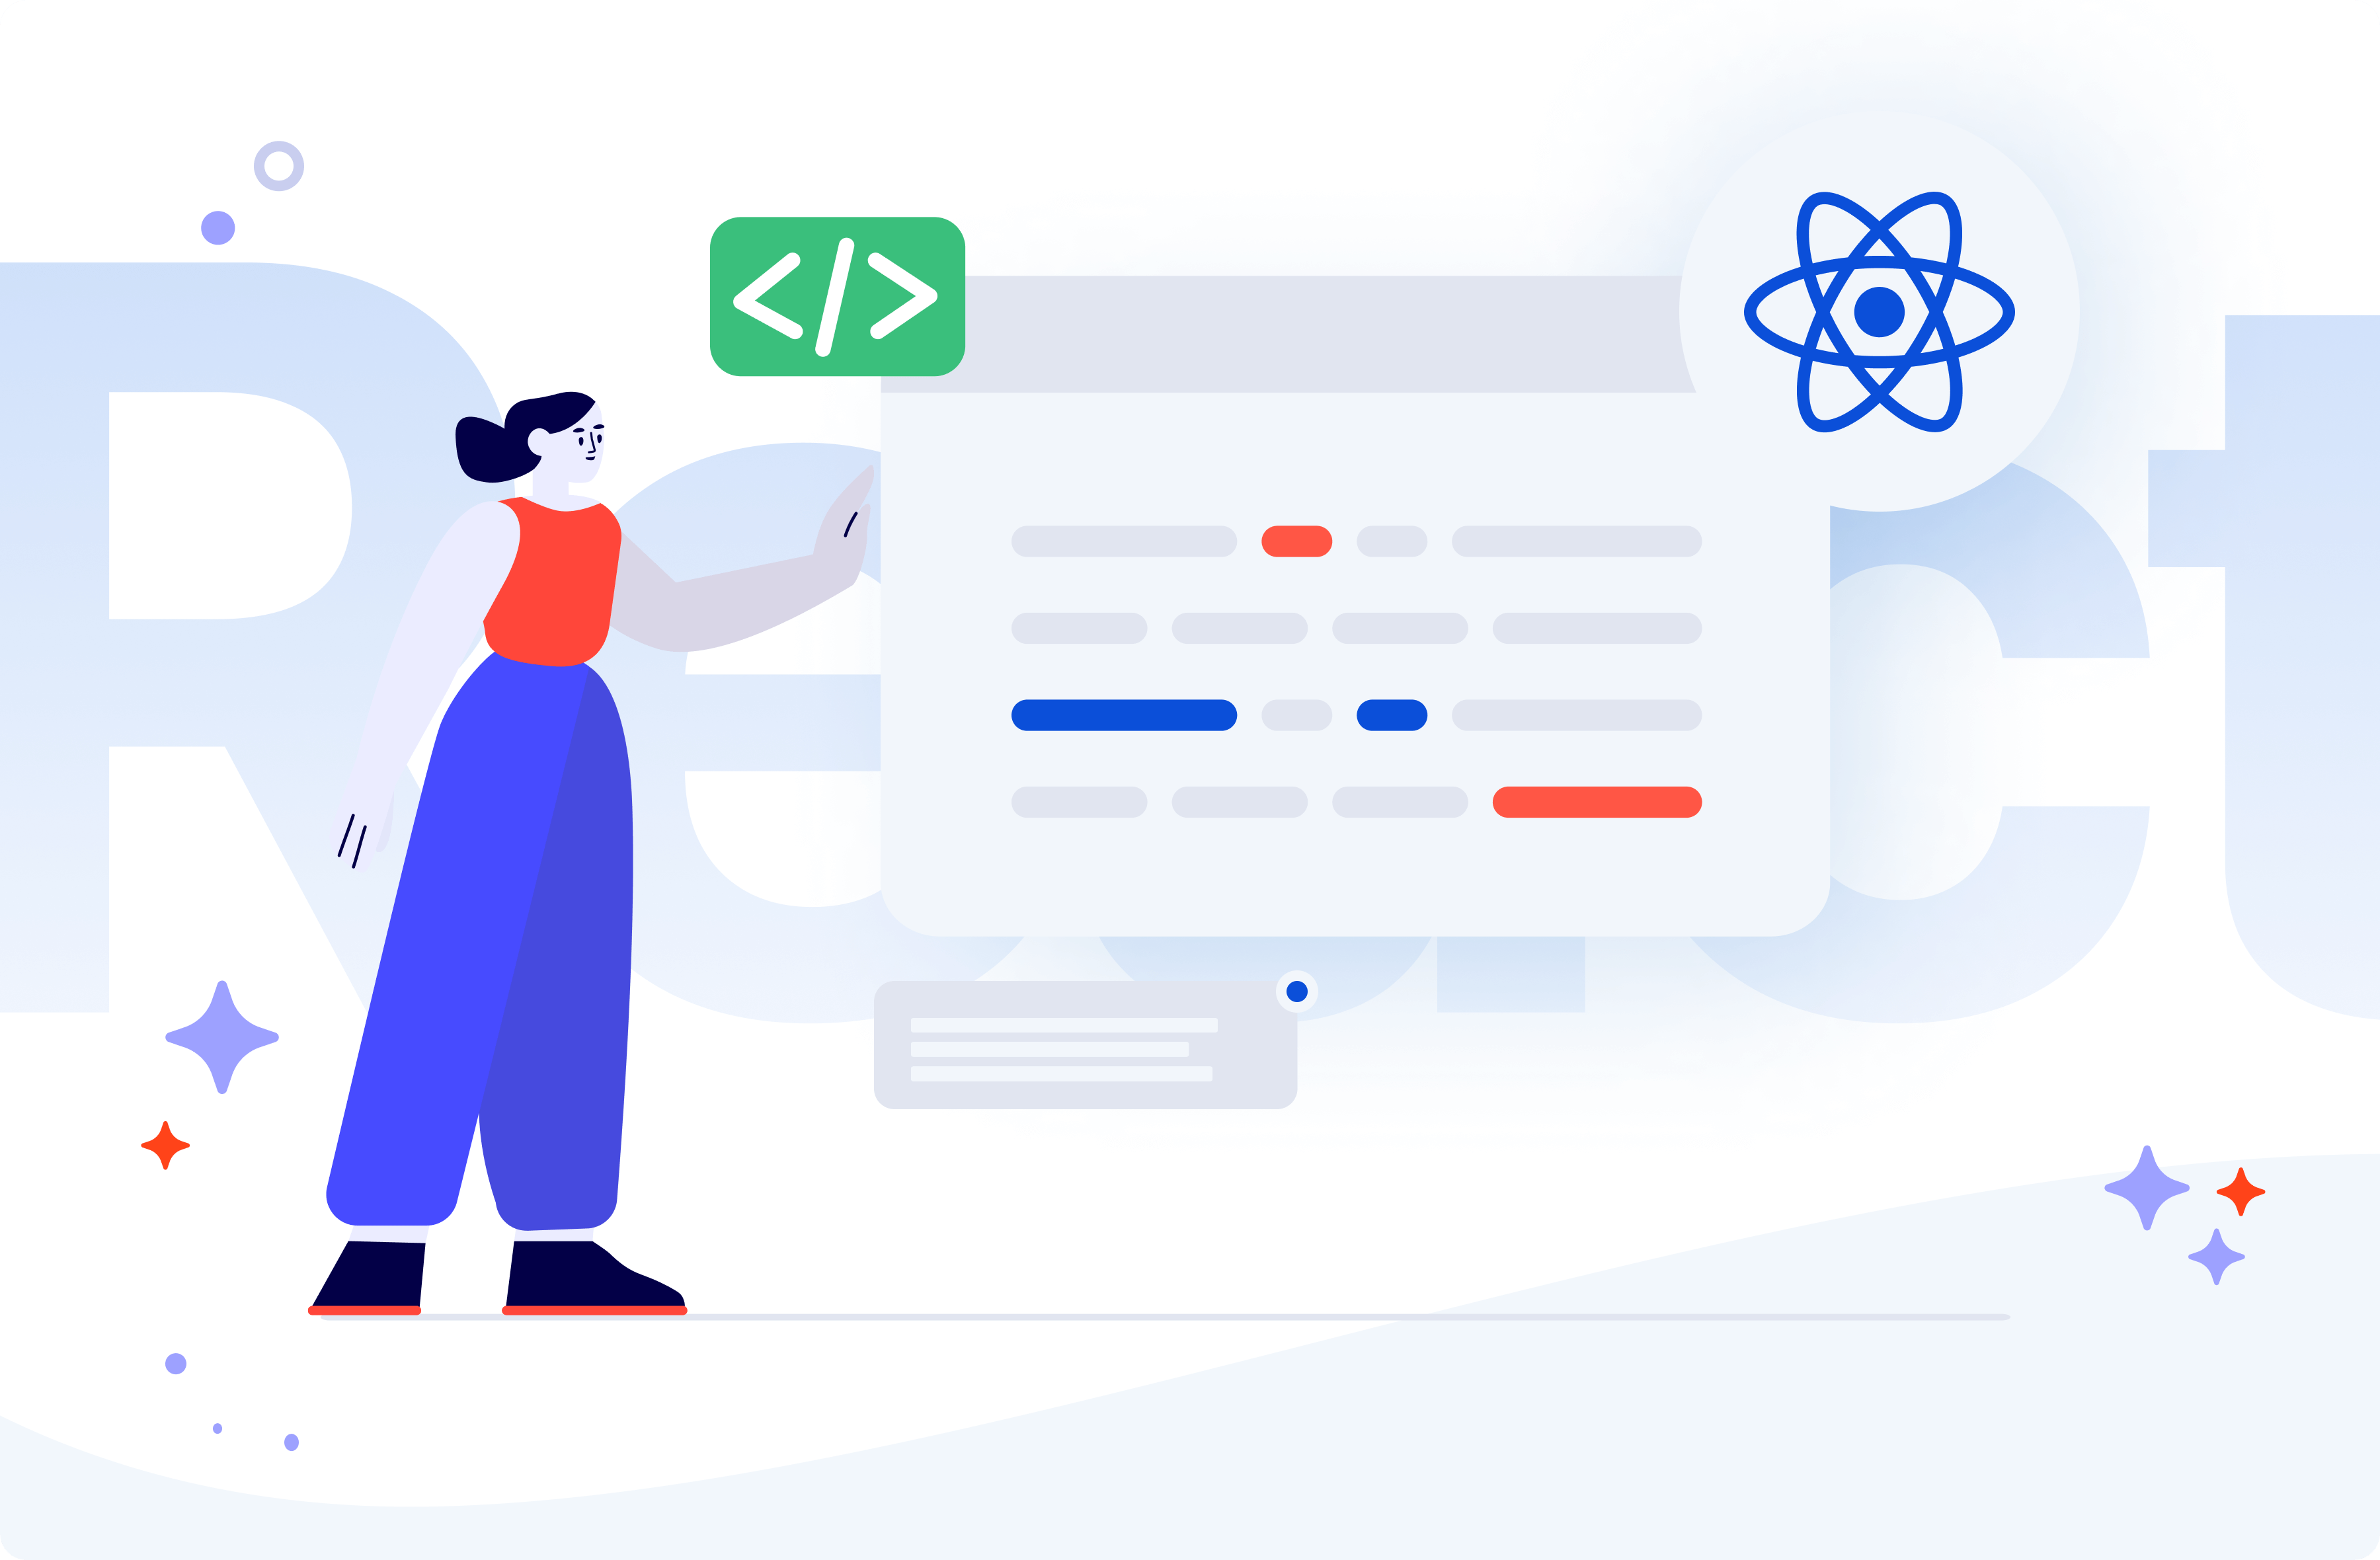 How does React work under the hood? Find out and become a better developer